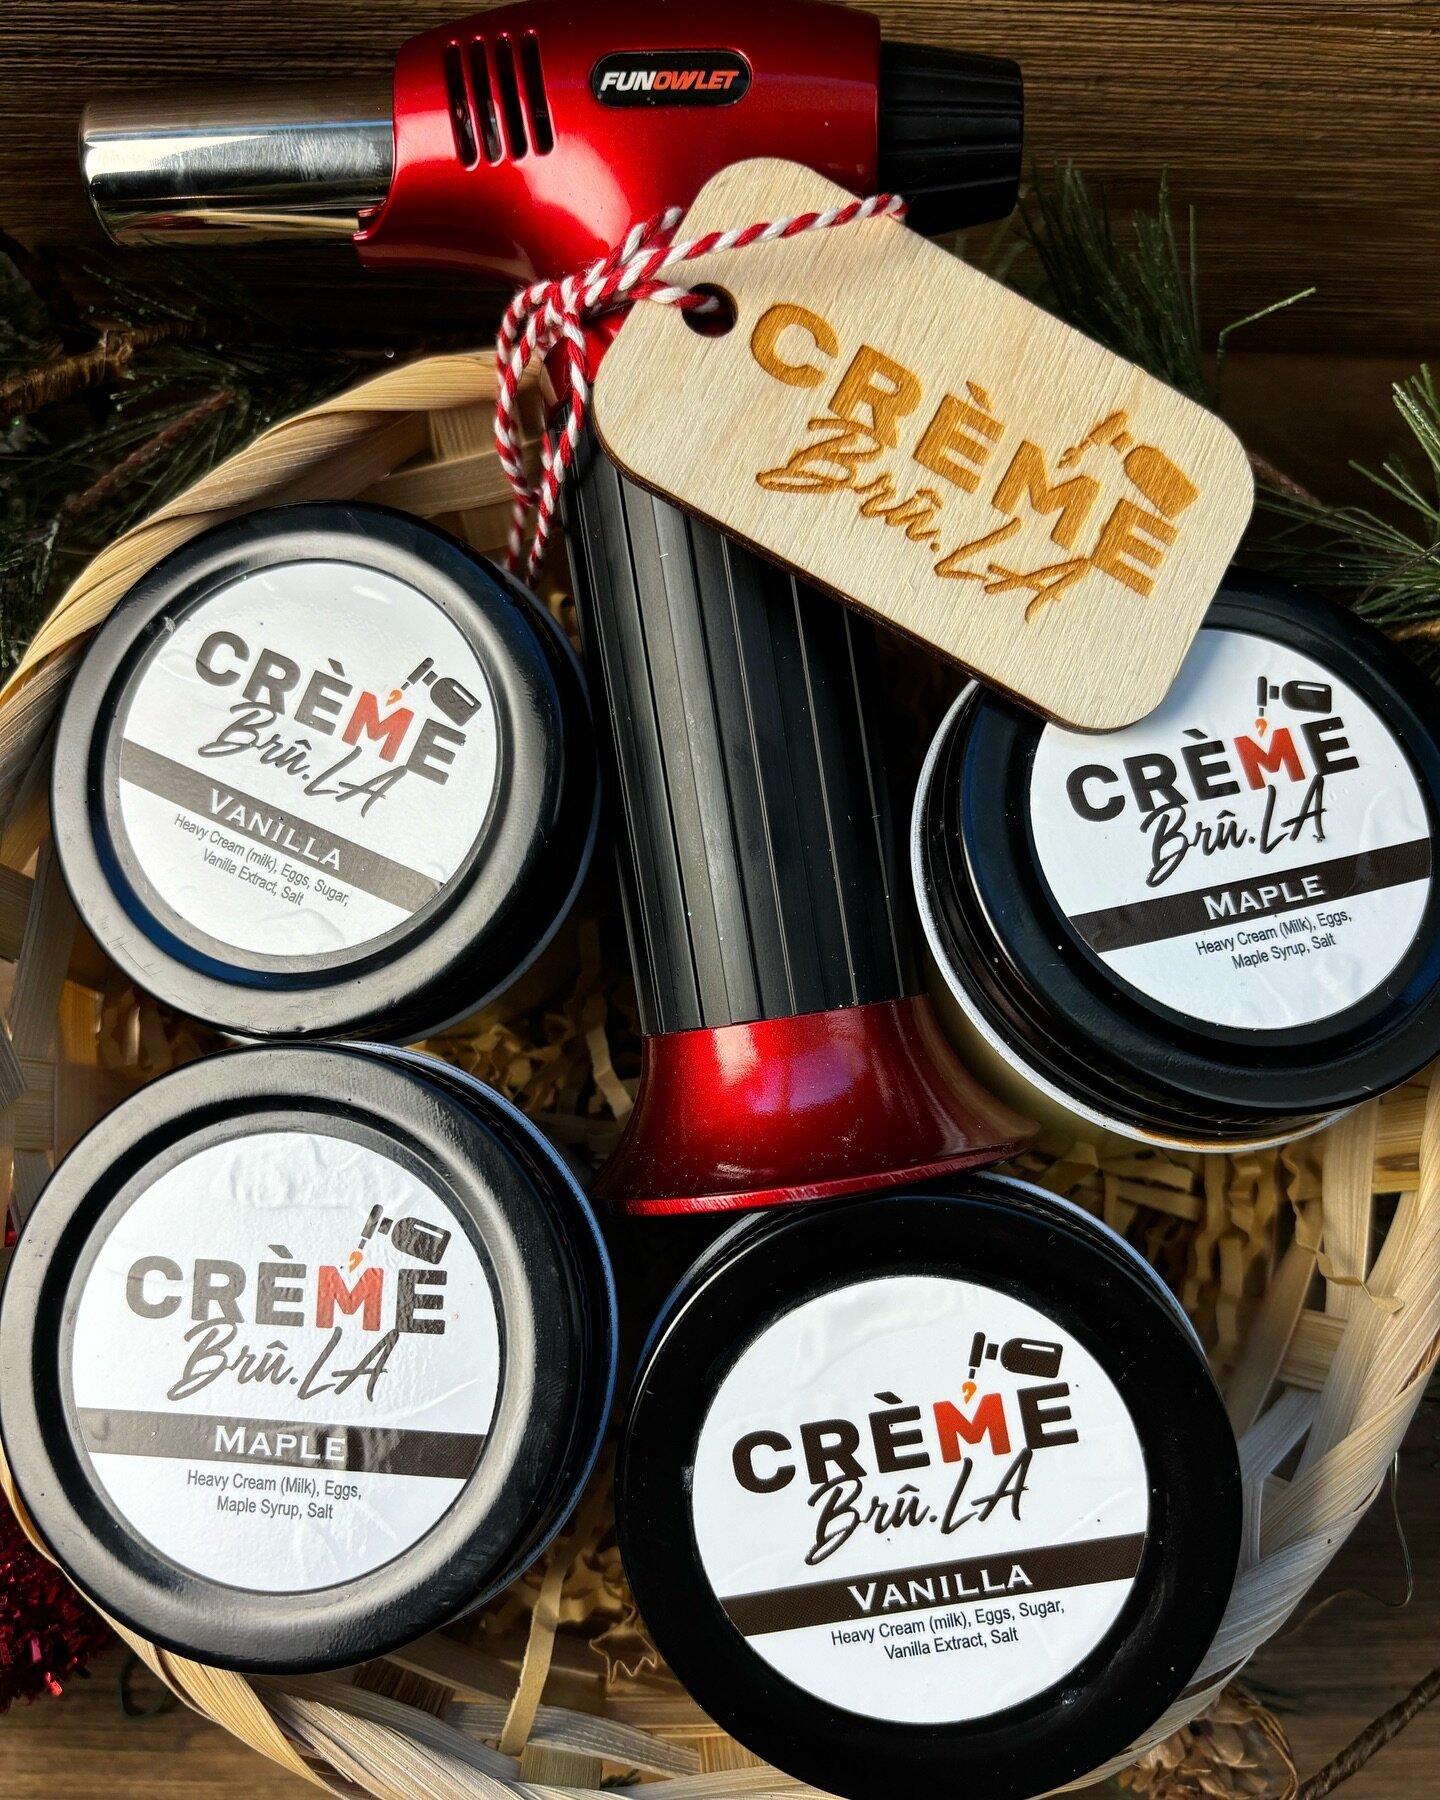 Holiday cr&egrave;me br&ucirc;l&eacute;e kits* from CremeBru.LA are back at @amherstdowntown&lsquo;s Holiday Sip &lsquo;n Stroll at 45 South Pleasant St. (formerly Hastings) on Thursday, 12/14.

We&rsquo;re accepting pre-orders for limited quantities